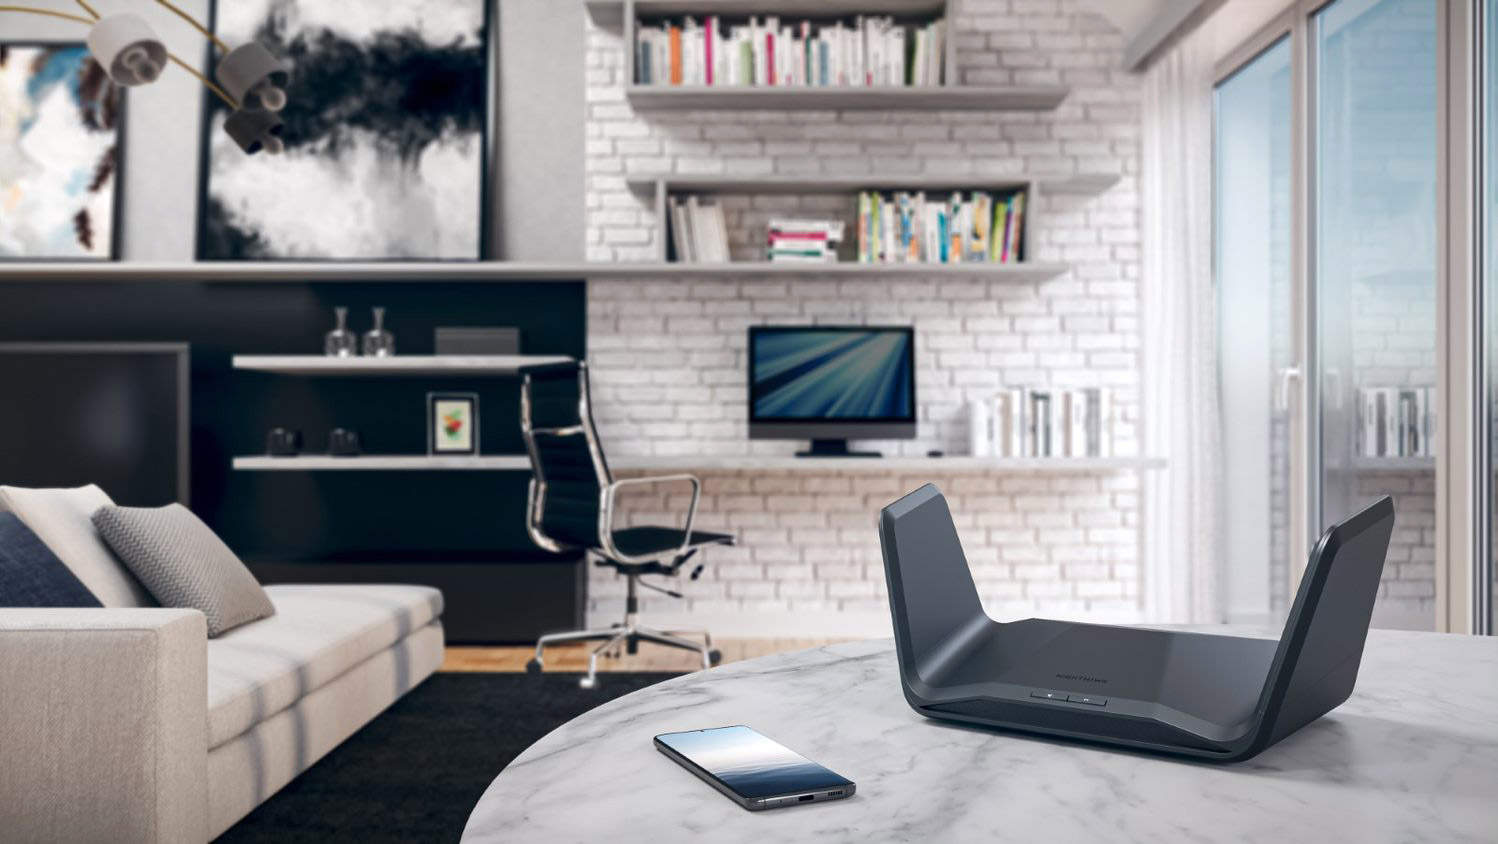 Lifestyle shot of the Netgear Nighthawk RAXE300 router on a table in front of a sliding glass door in a modern home.